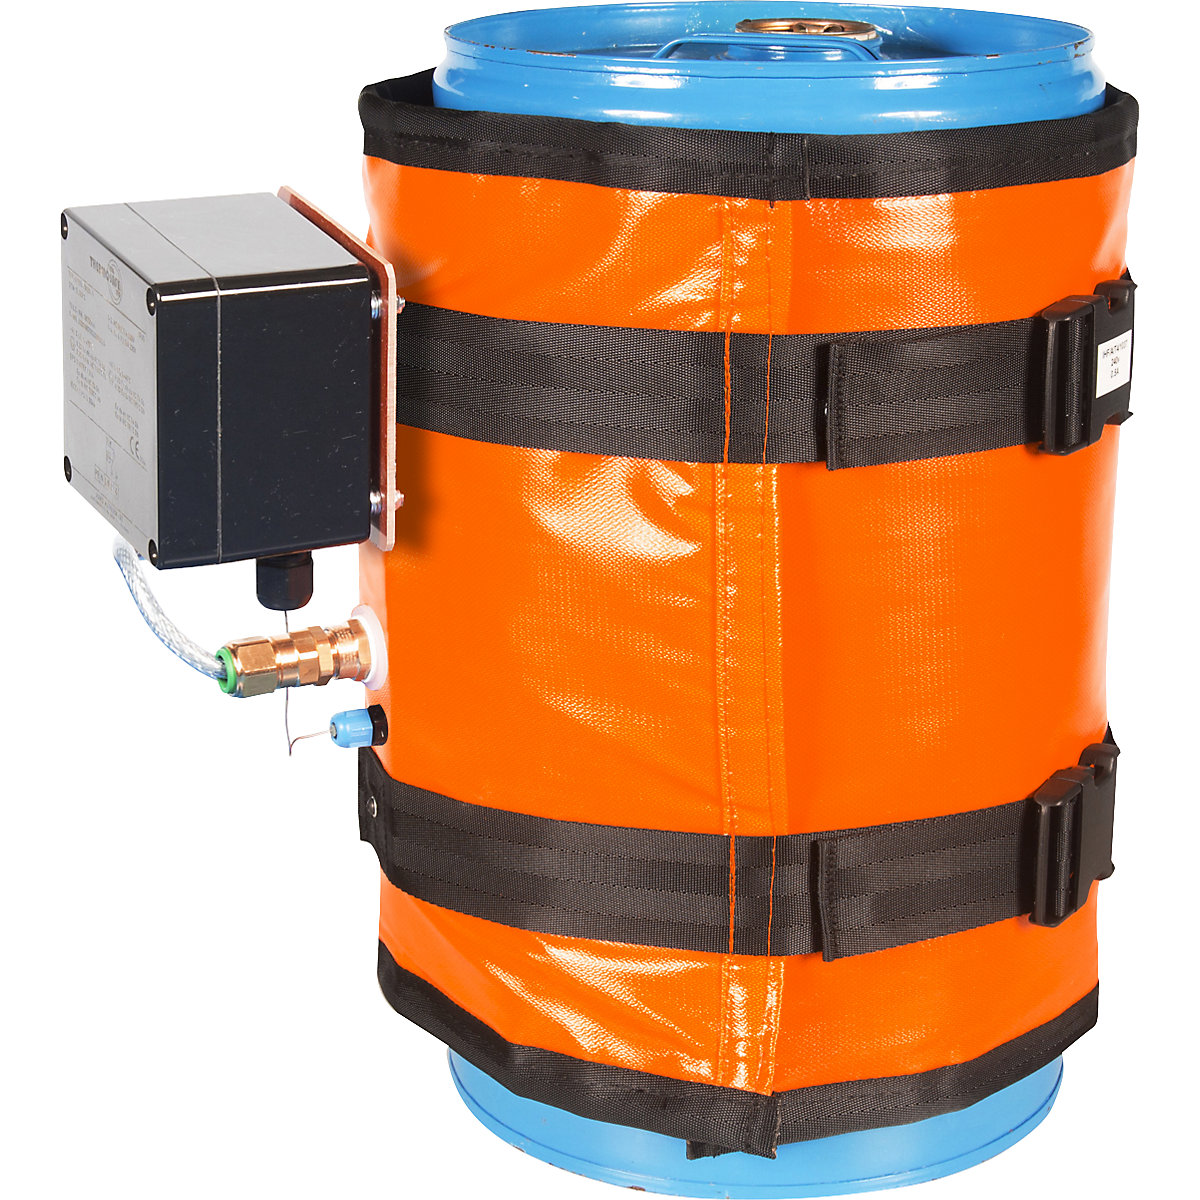 PRO ATEX canister/drum heating jacket